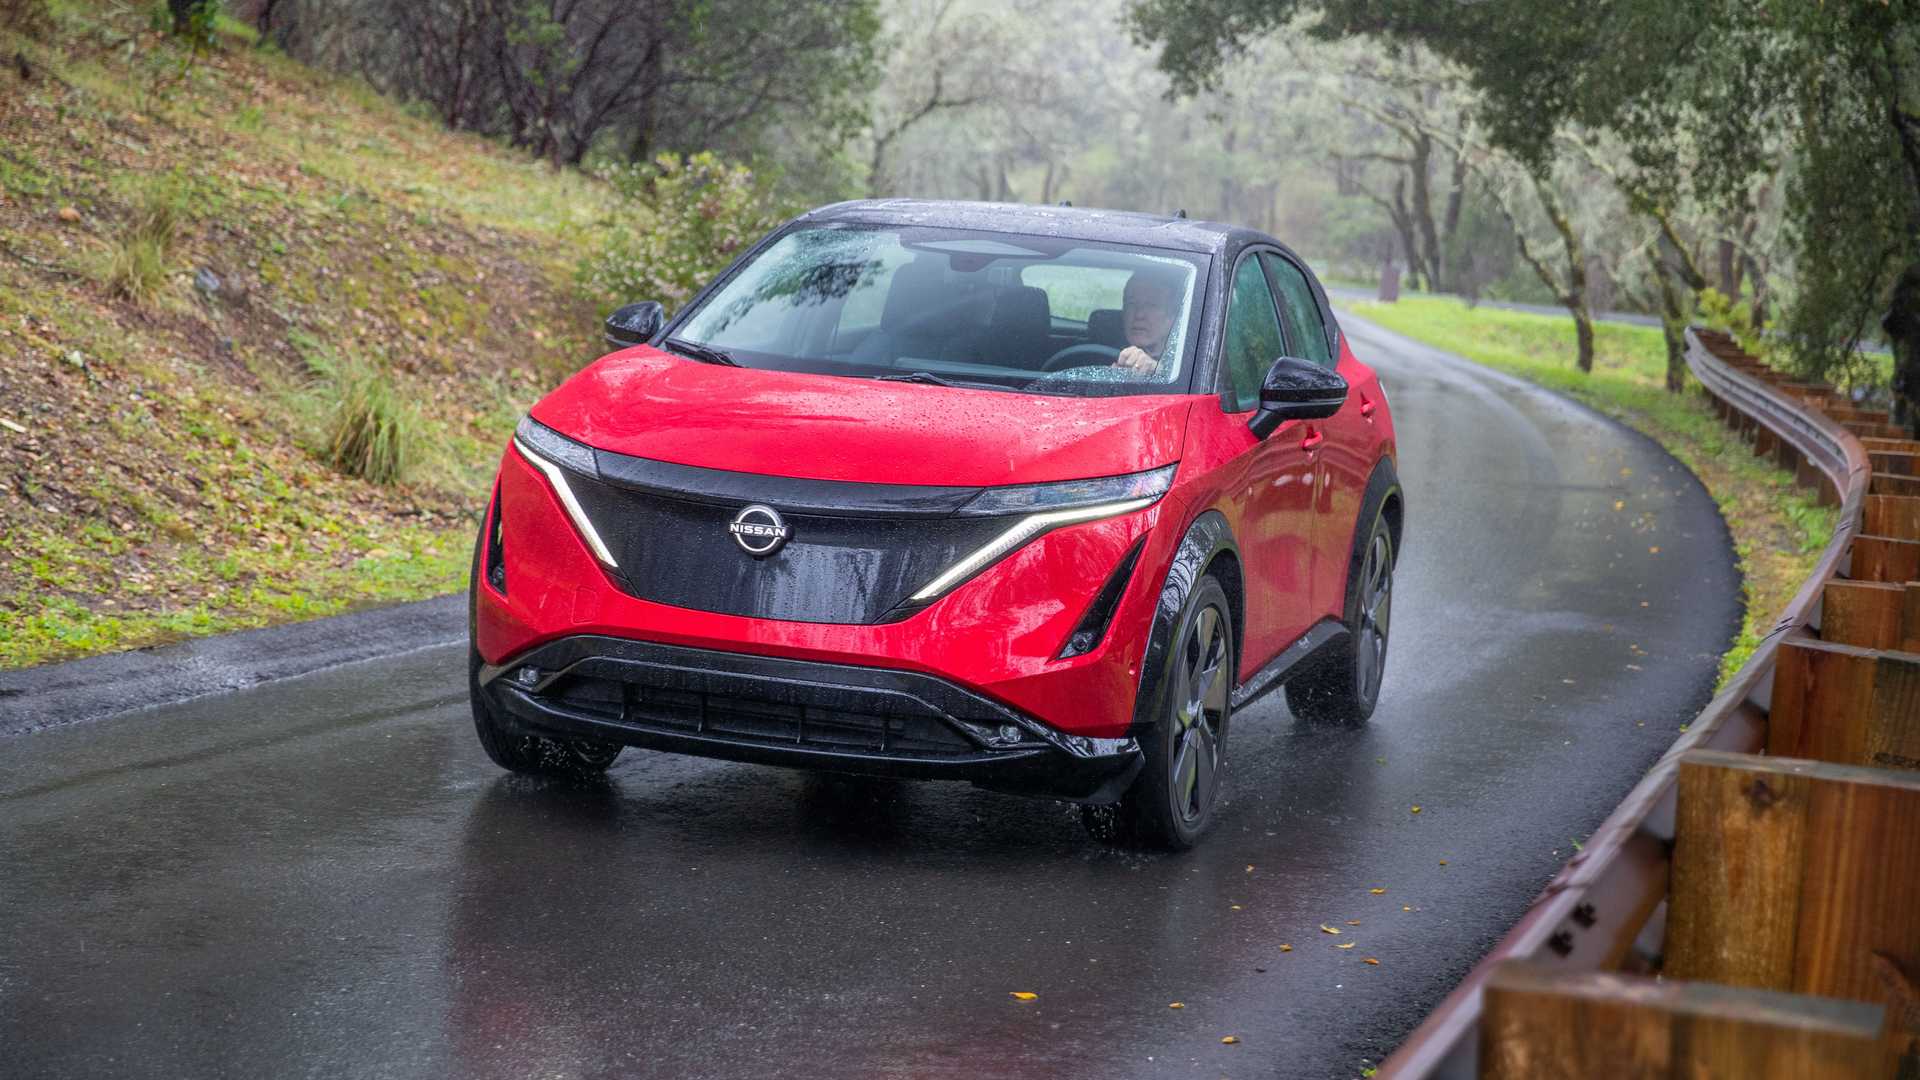 2023 nissan ariya e-4orce first drive review: the calm within the storm